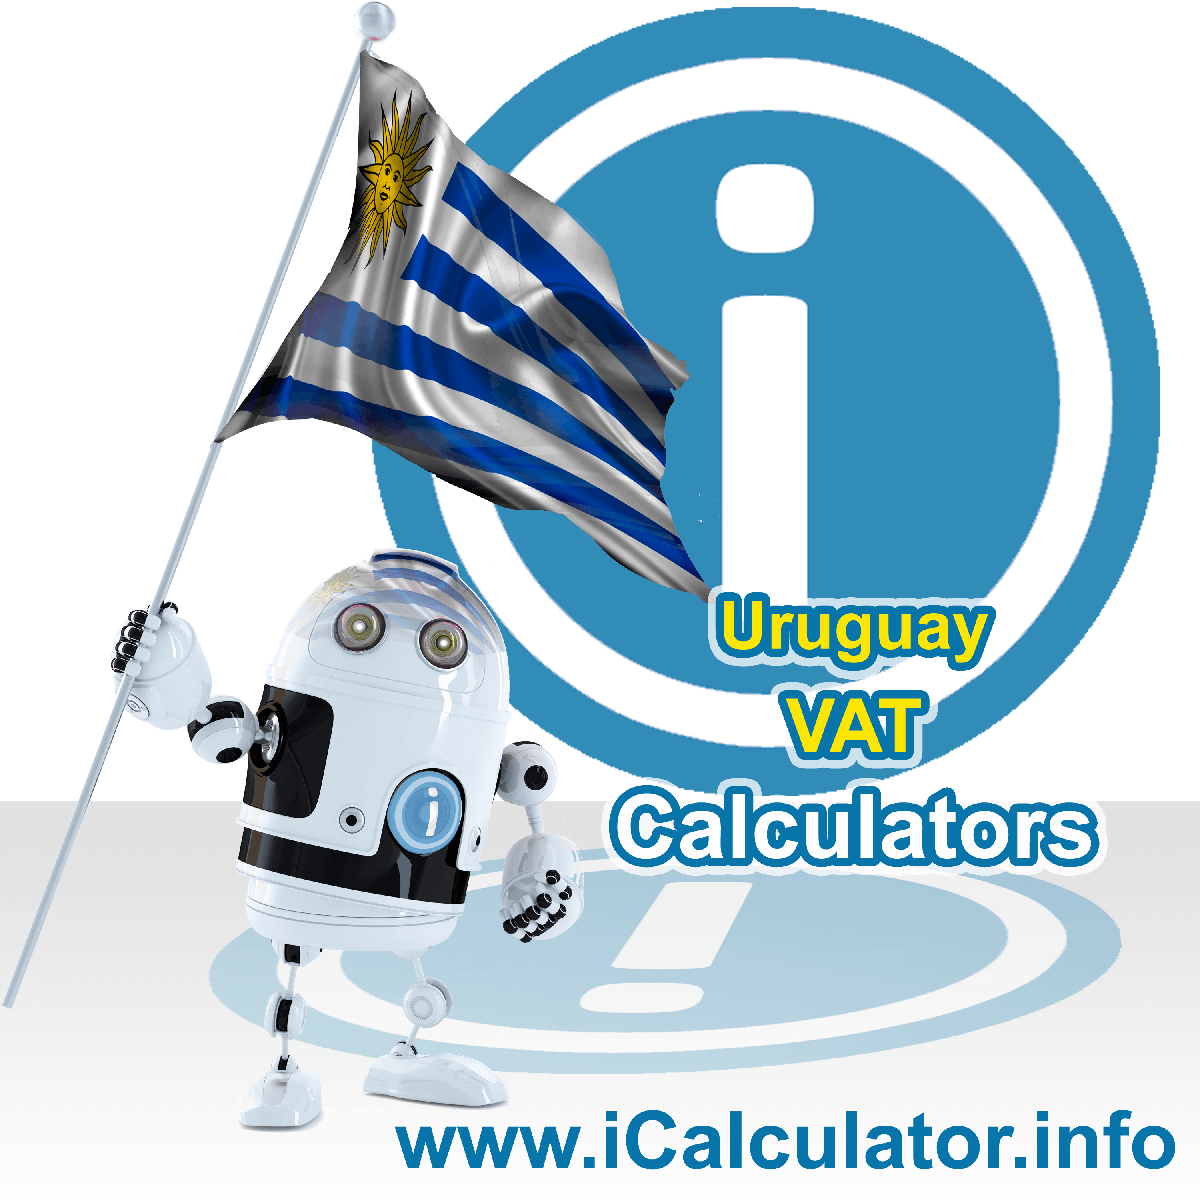 Uruguay VAT Calculator. This image shows the Uruguay flag and information relating to the VAT formula used for calculating Value Added Tax in Uruguay using the Uruguay VAT Calculator in 2024